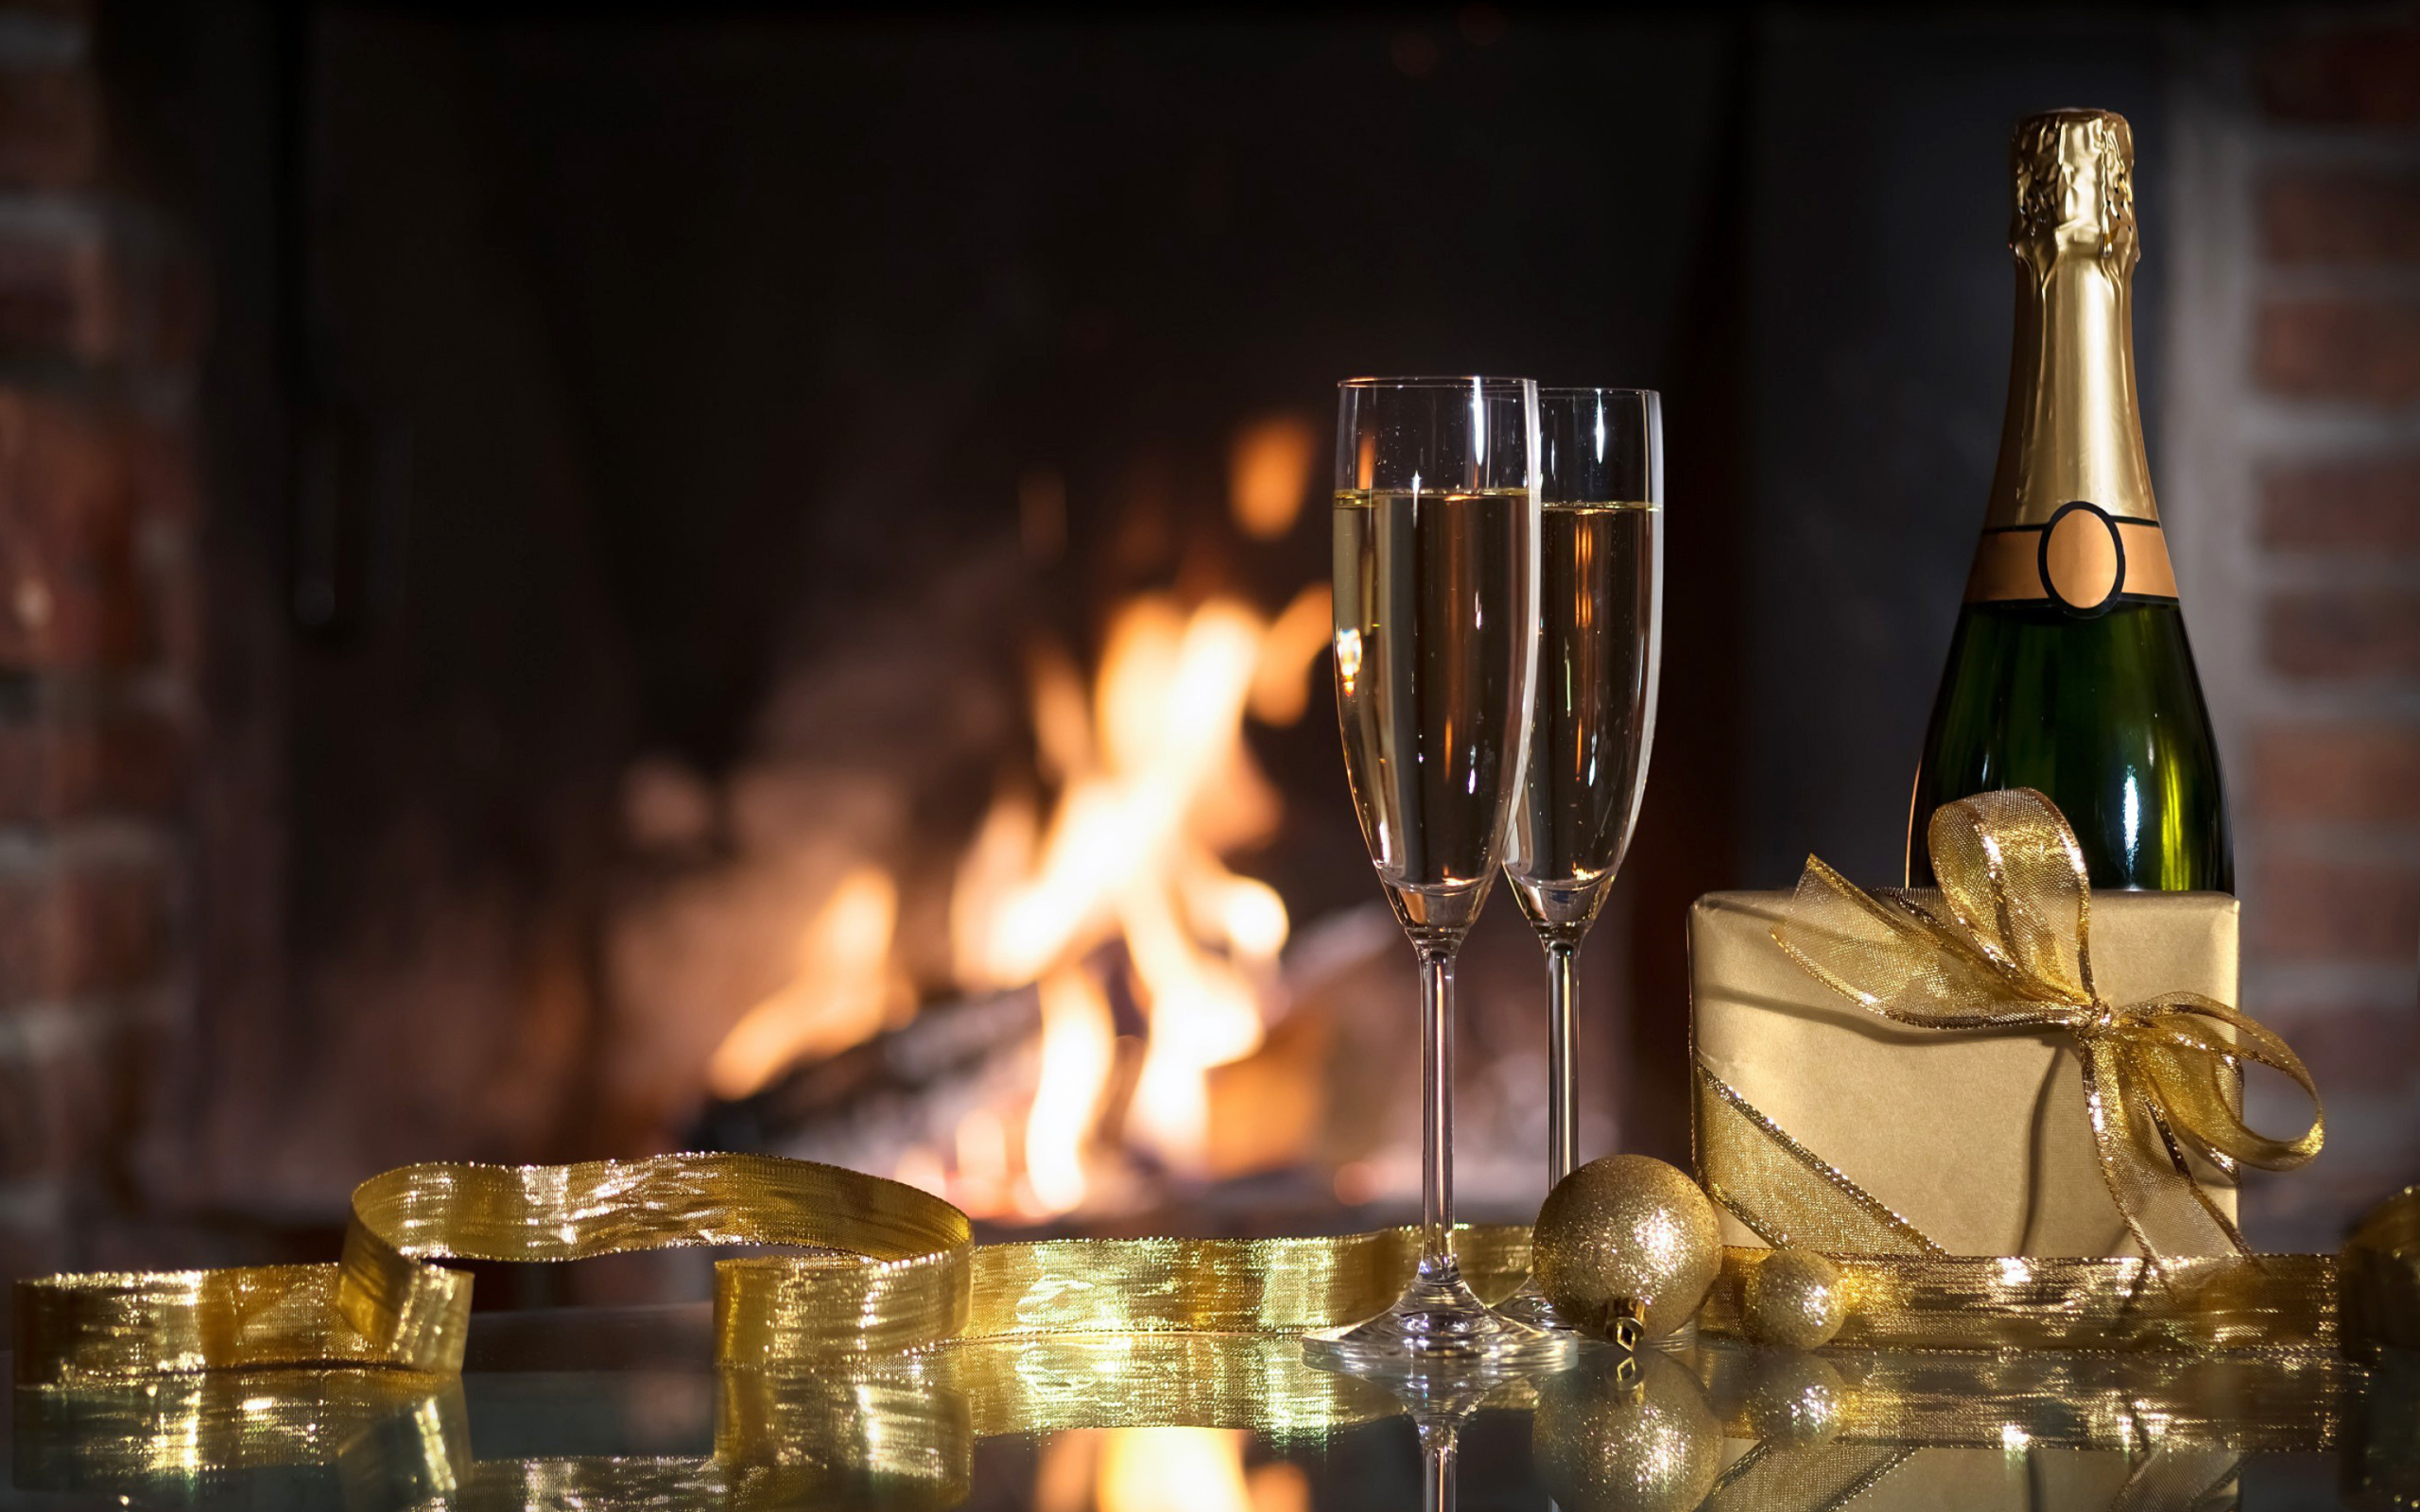 Das Champagne and Fireplace Wallpaper 2560x1600